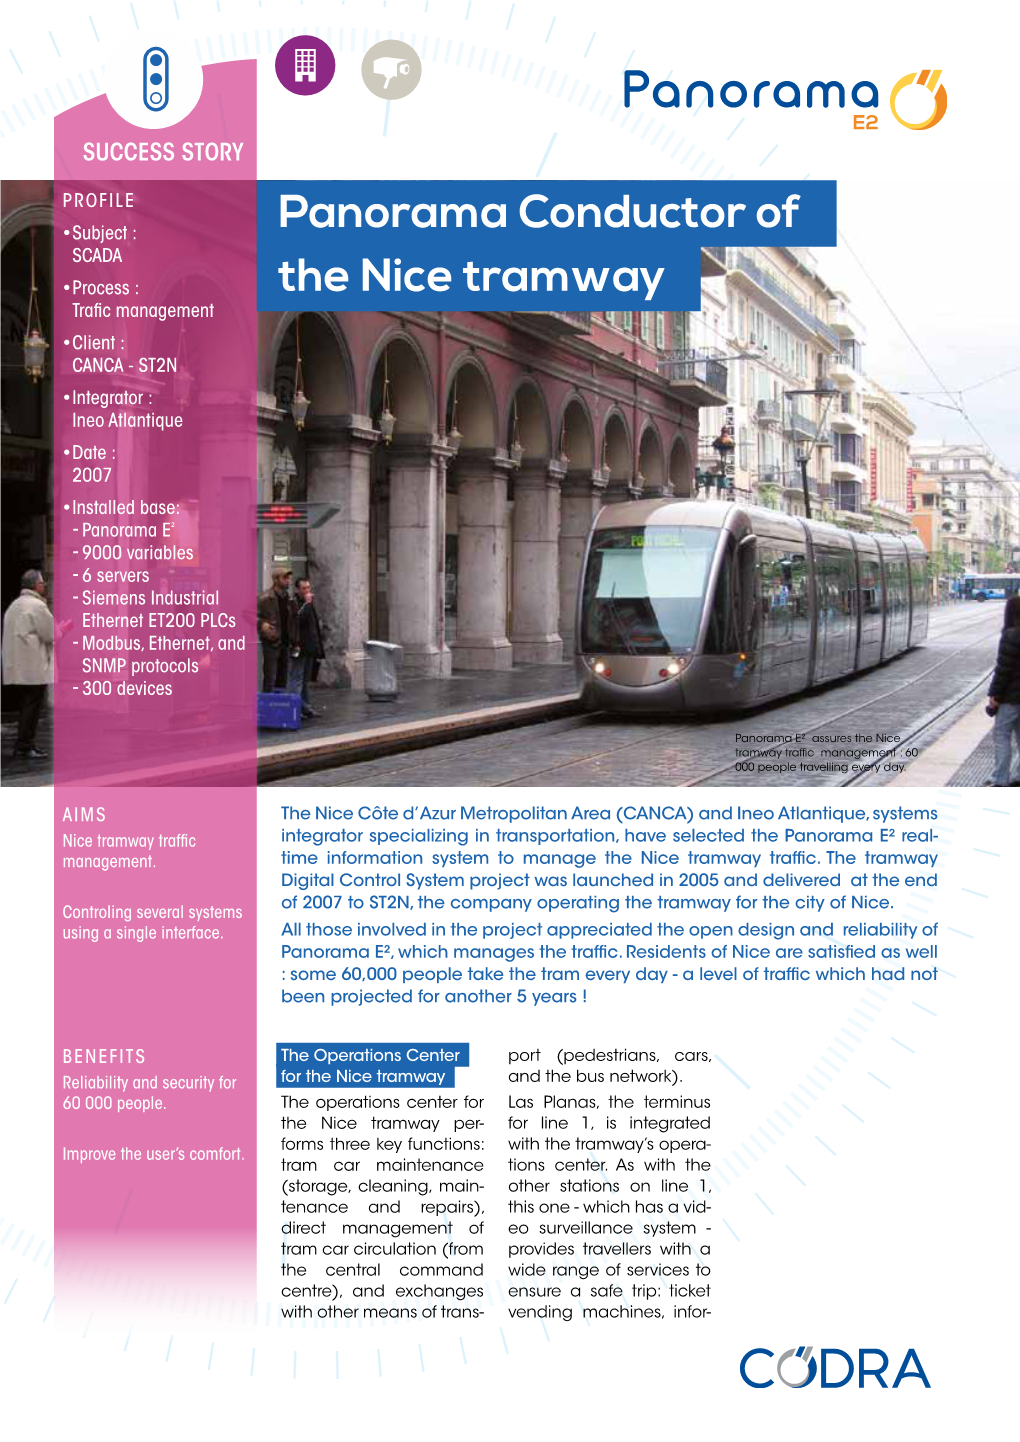 Panorama Conductor of the Nice Tramway